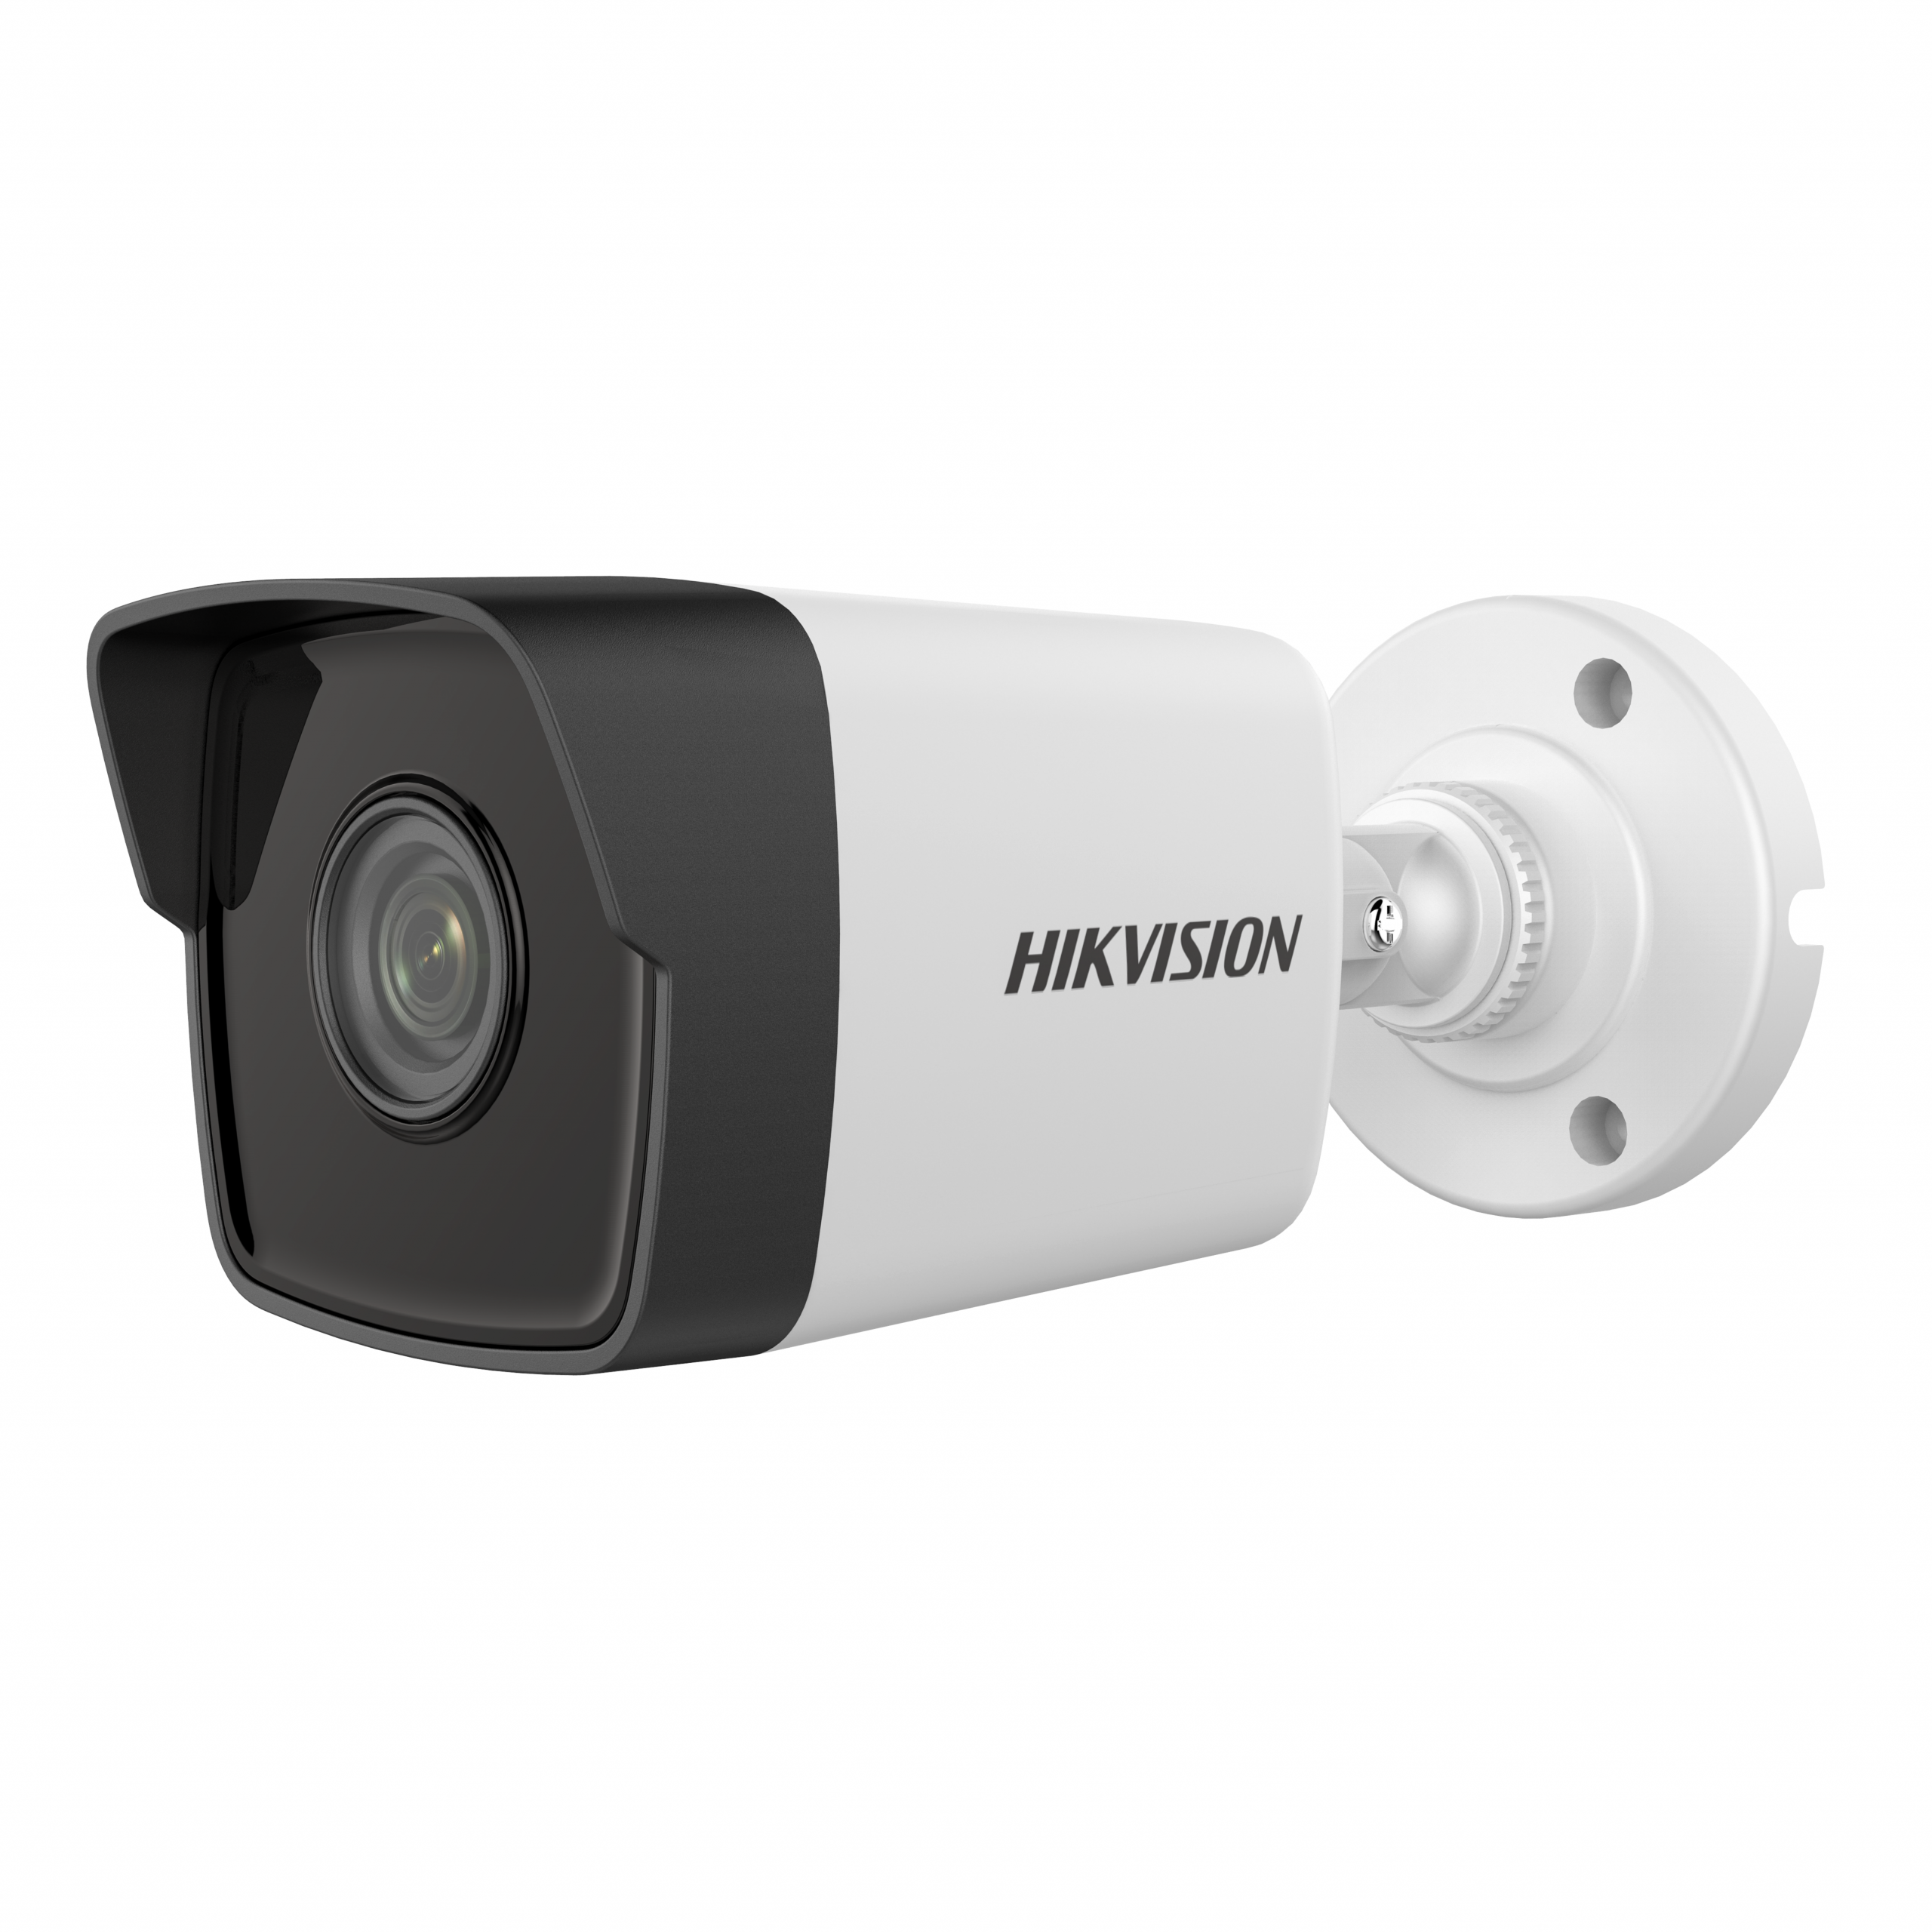 Hikvision 2MP w/ Built-in Mic Bullet Network Camera 